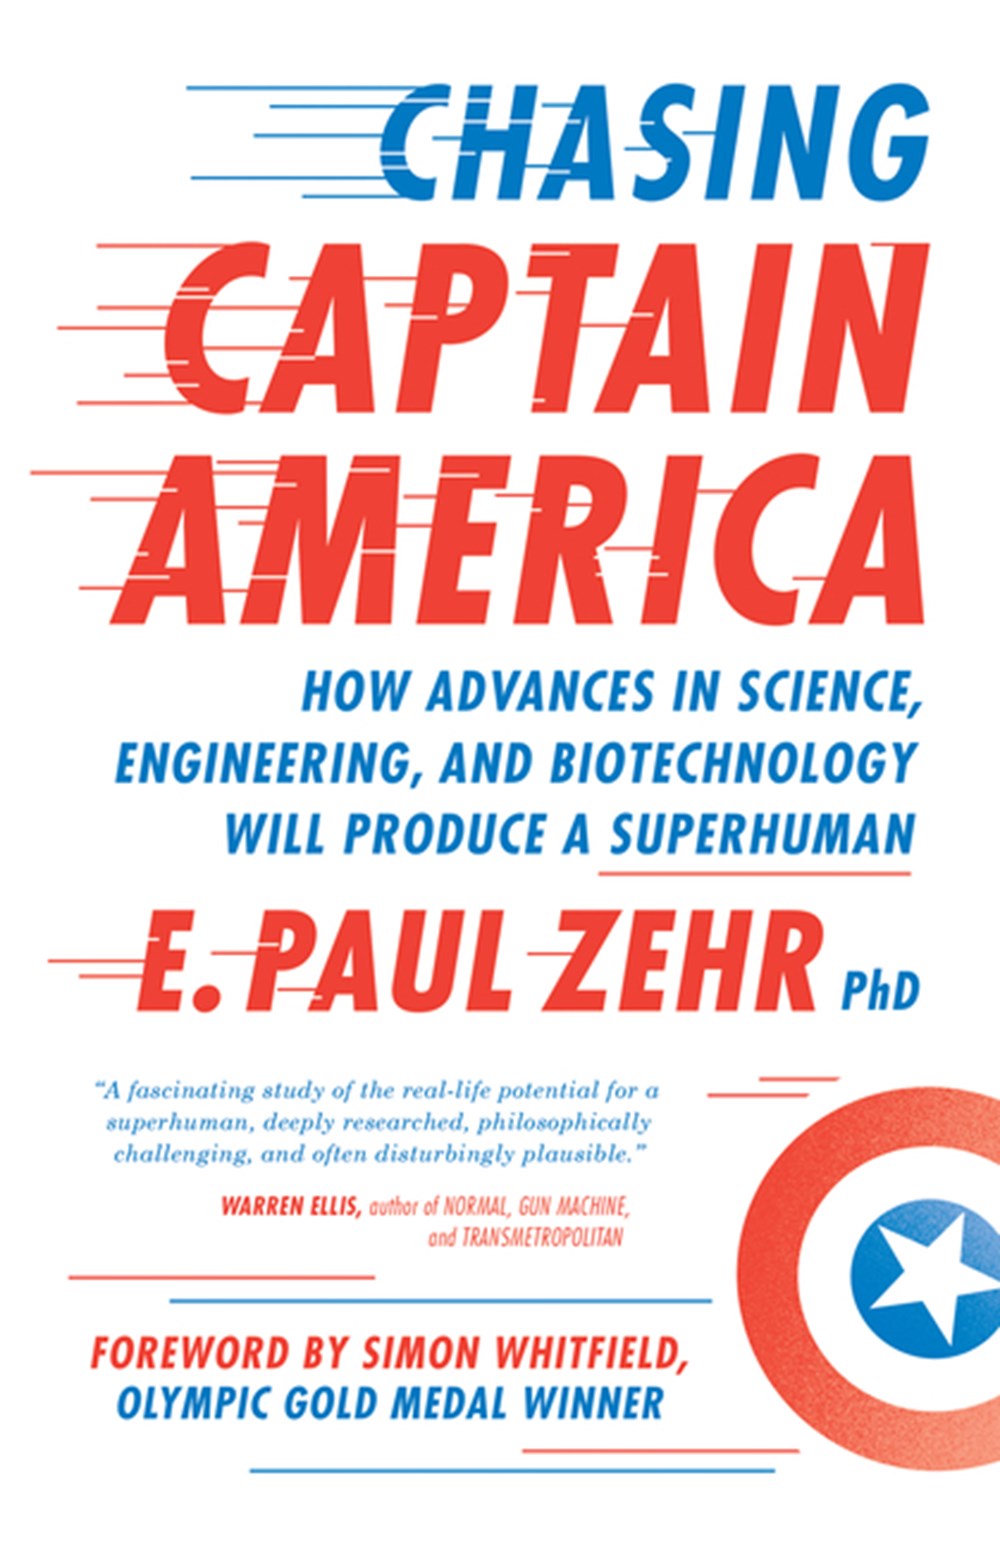 Chasing Captain America How Advances in Science, Engineering, and Biotechnology Will Produce a Super